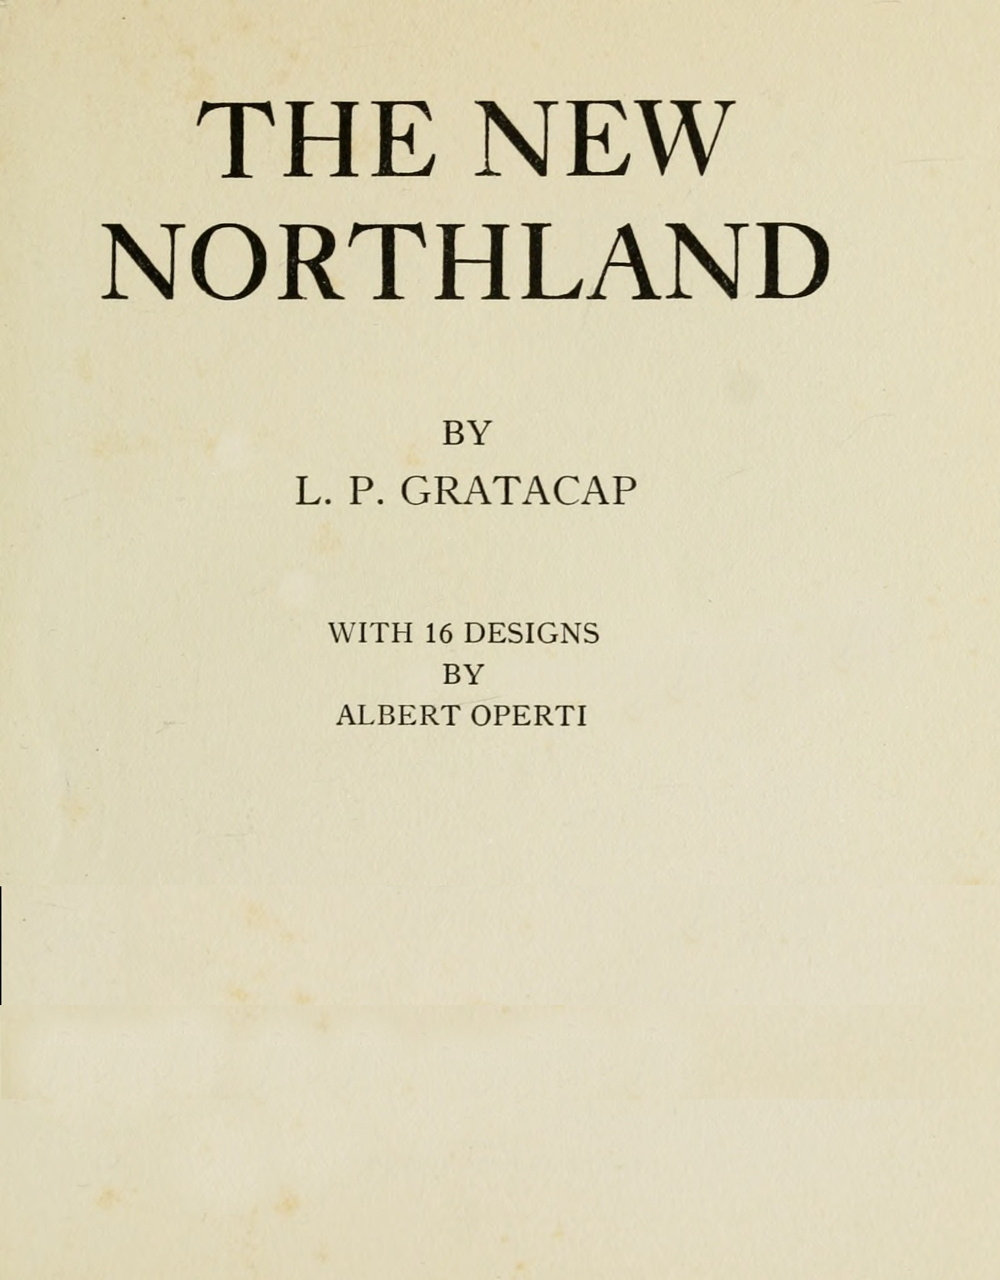 The New Northland, by L. P. Gratacap—A Project Gutenberg eBook